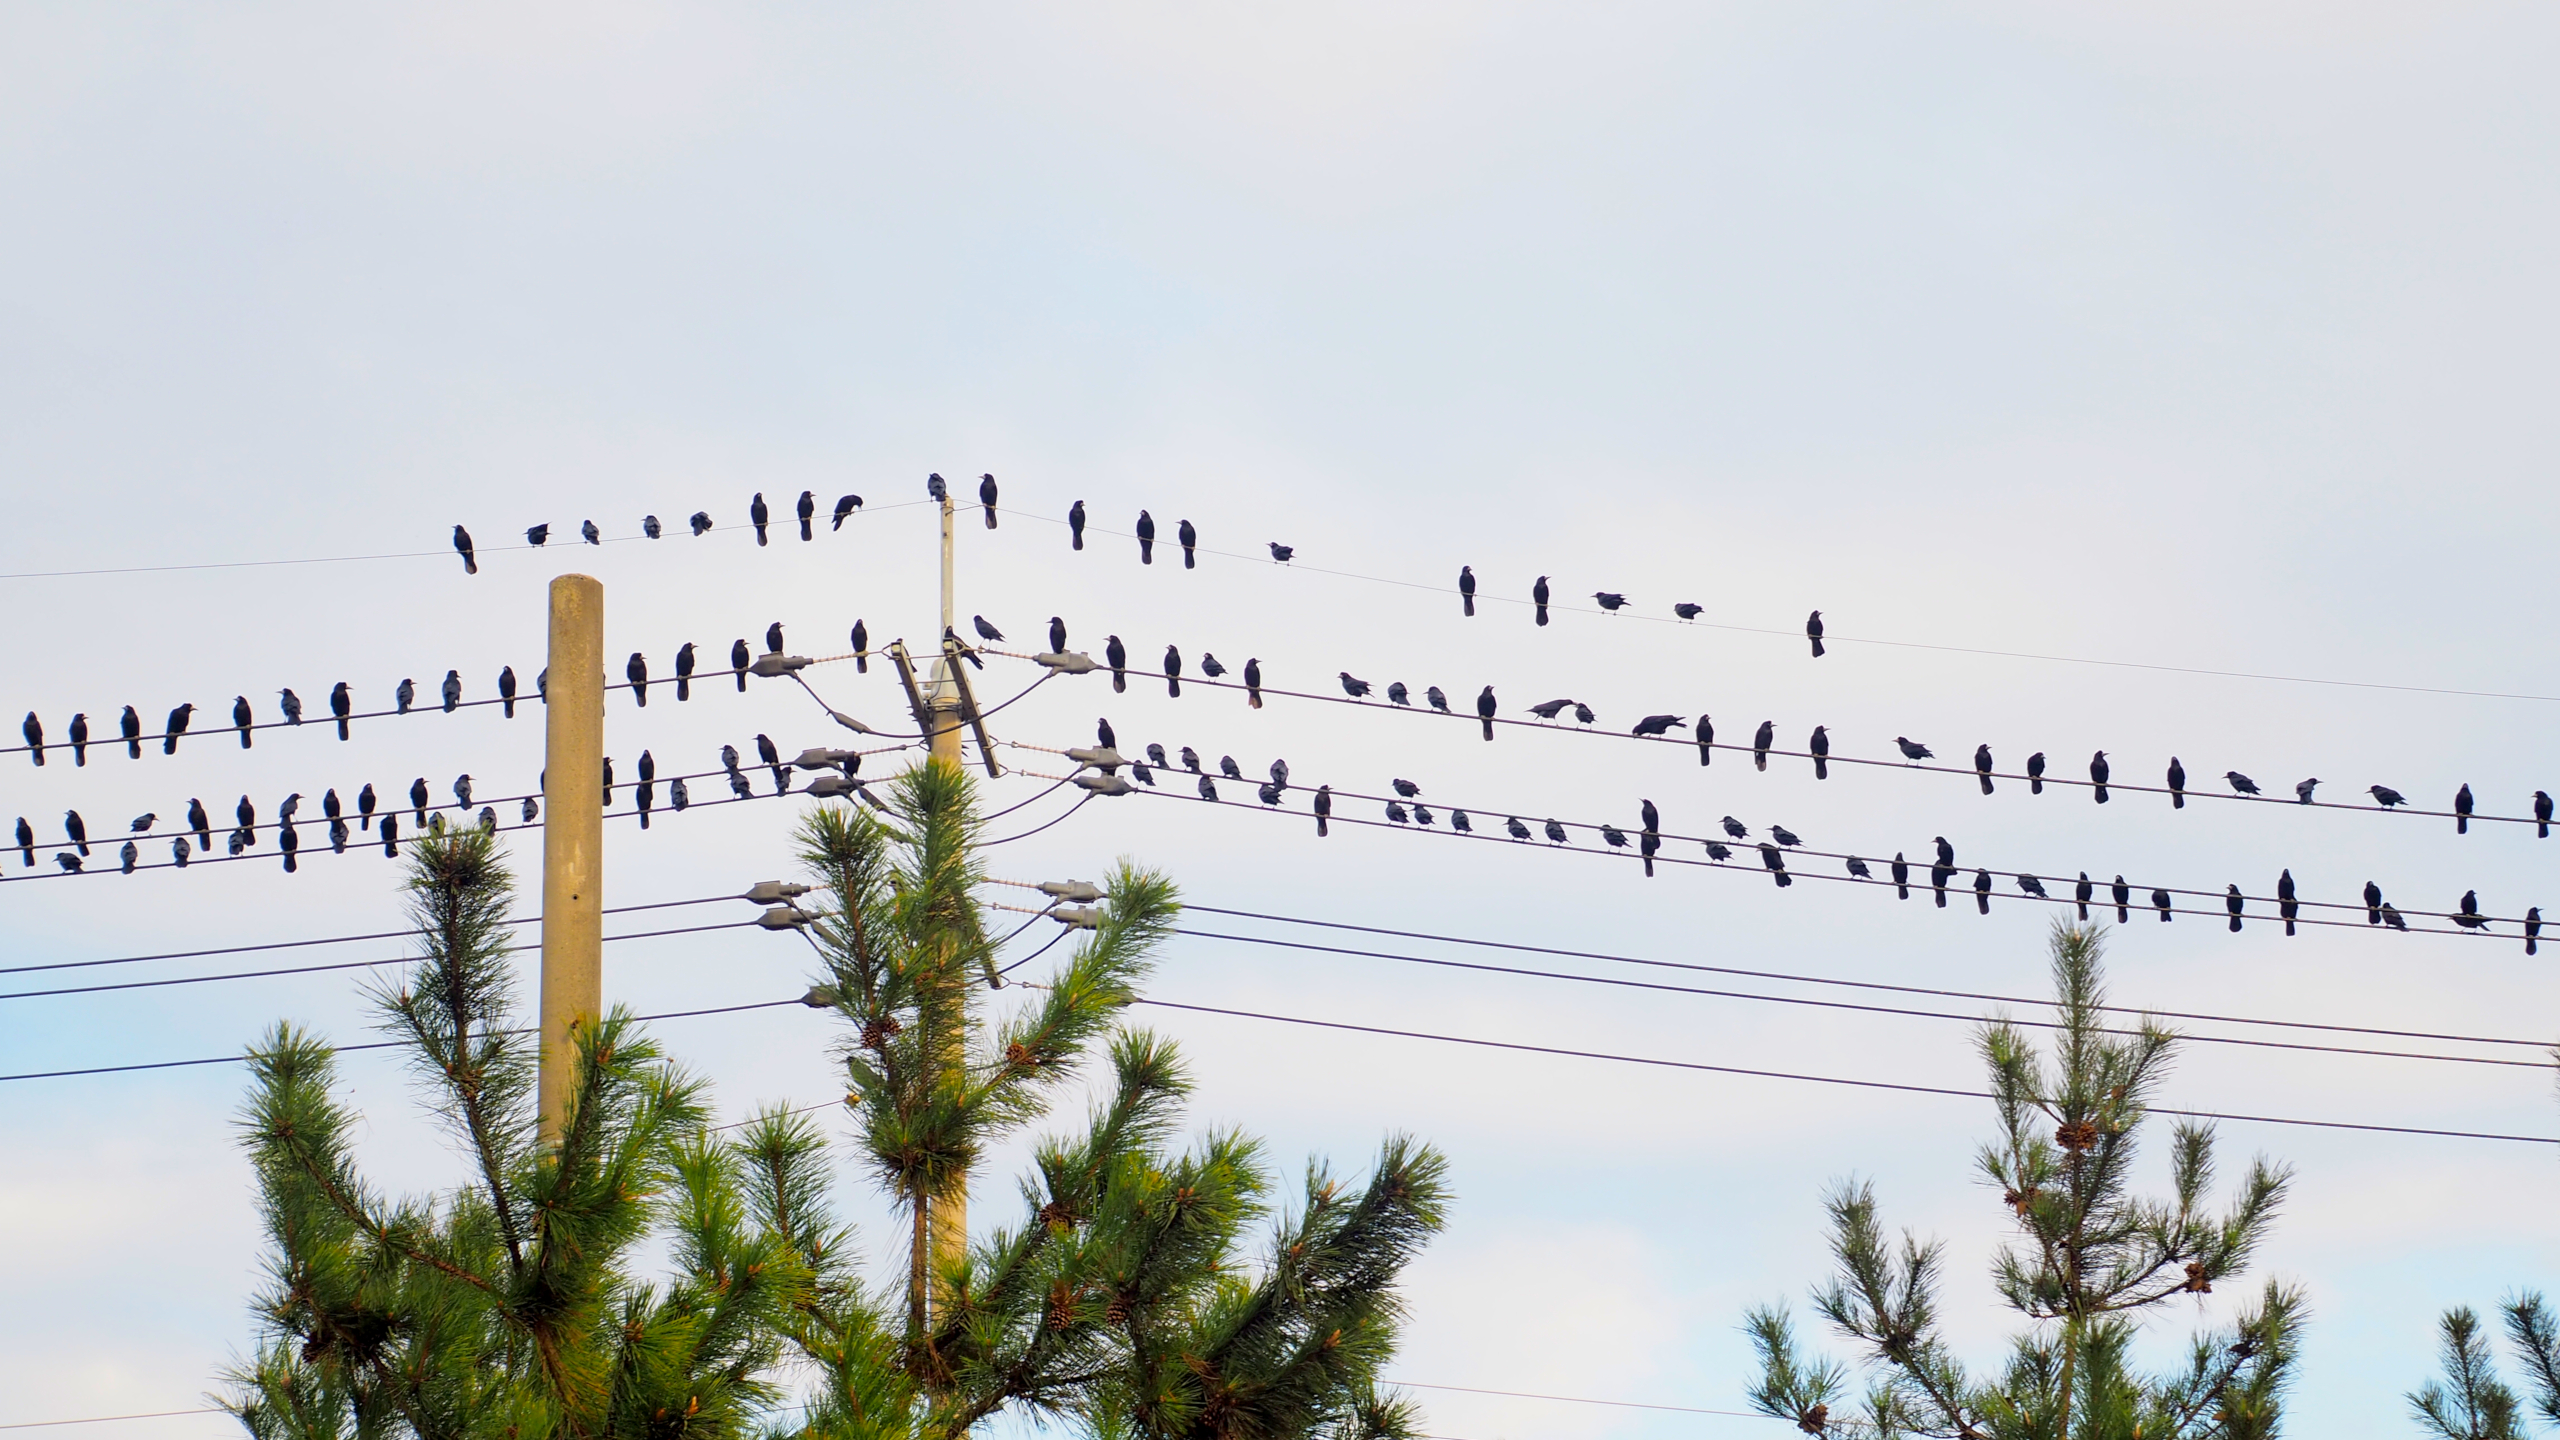 birds sitting on power lines behind some pine trees